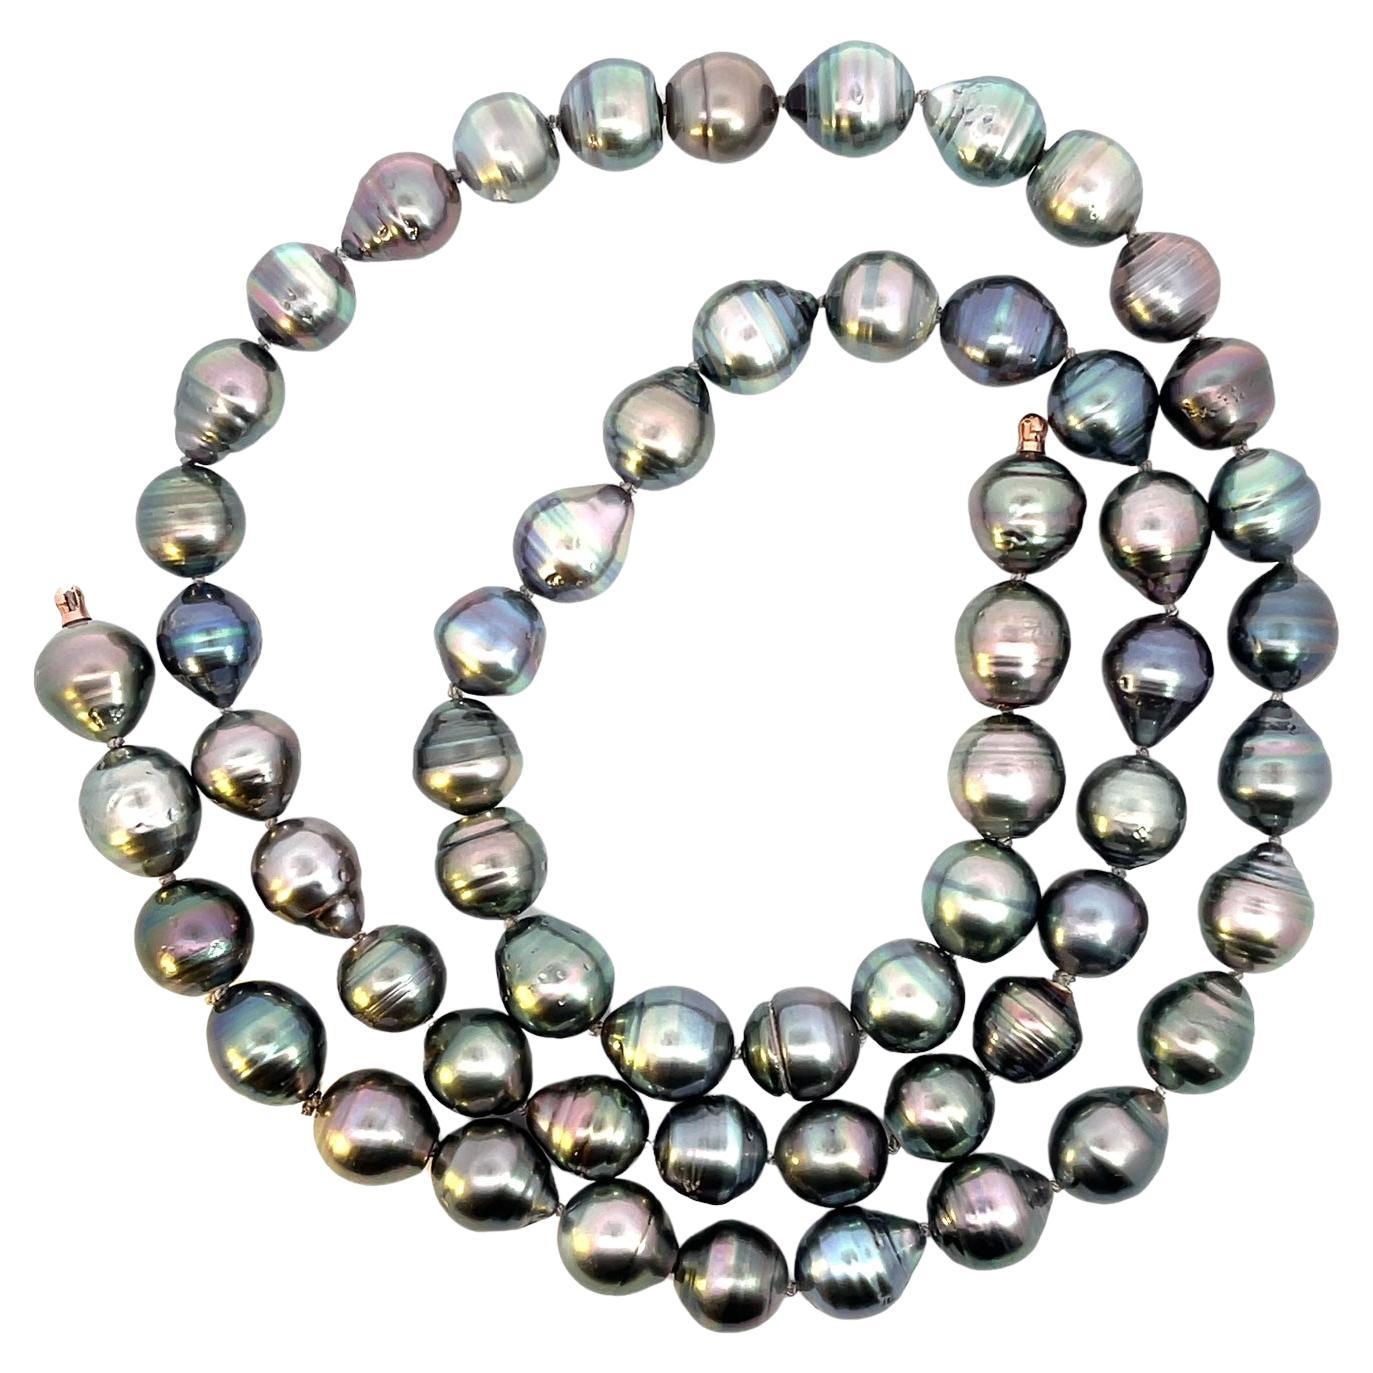 Modular Tahitian Pearl Strand with 18k Rose Gold Keys and a Self Clasp